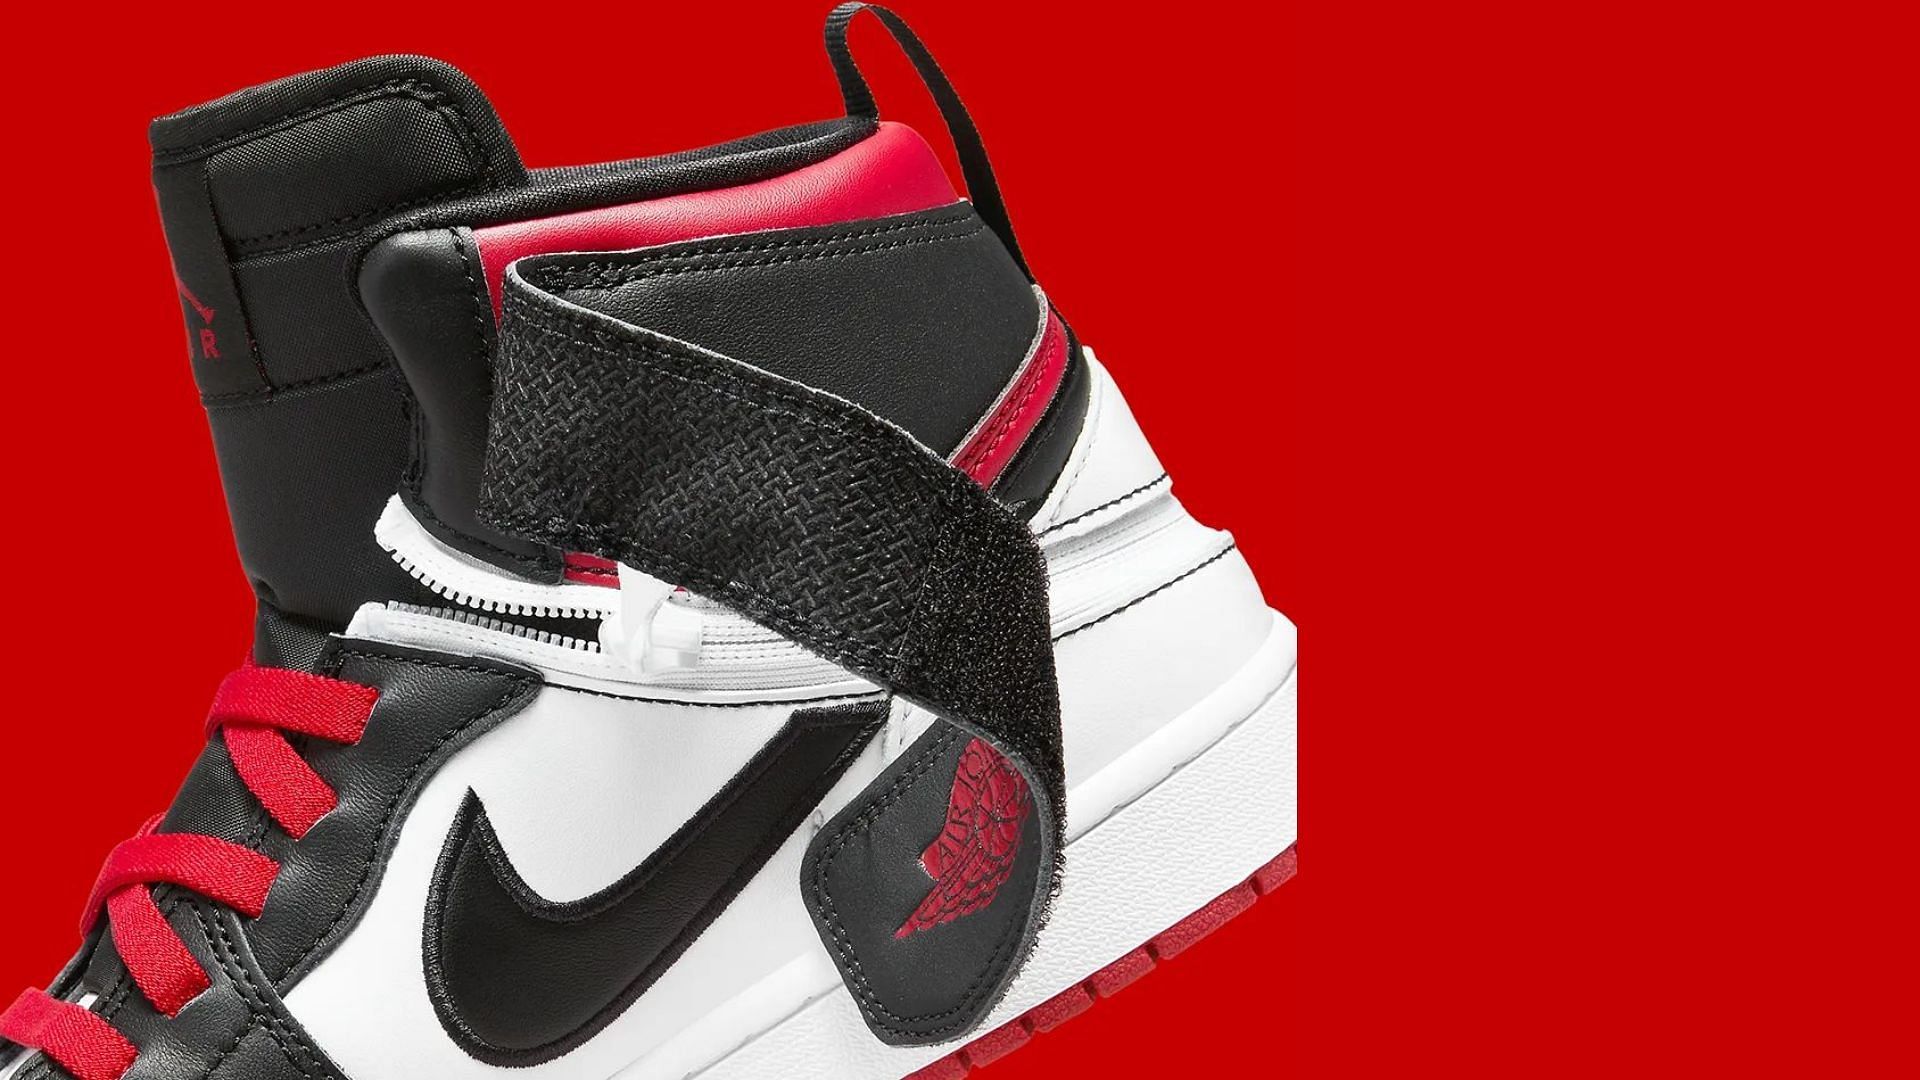 Take a closer look at the velcro fasteners of the sneaker (Image via Nike)